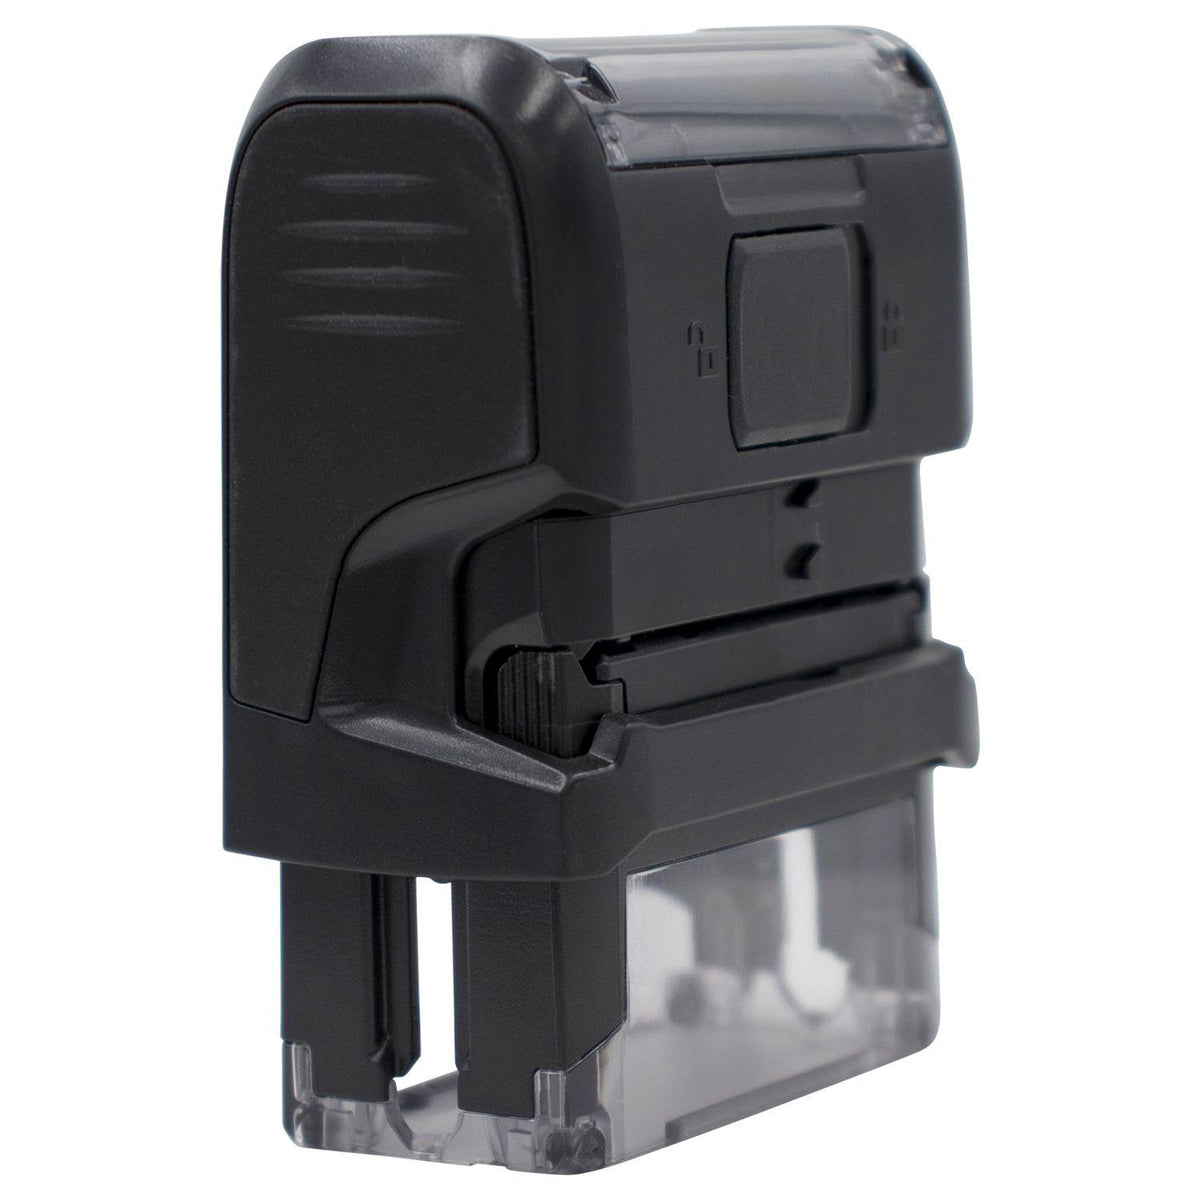 Self-Inking Small Packet Stamp - Engineer Seal Stamps - Brand_Trodat, Impression Size_Small, Stamp Type_Self-Inking Stamp, Type of Use_Postal &amp; Mailing, Type of Use_Shipping &amp; Receiving